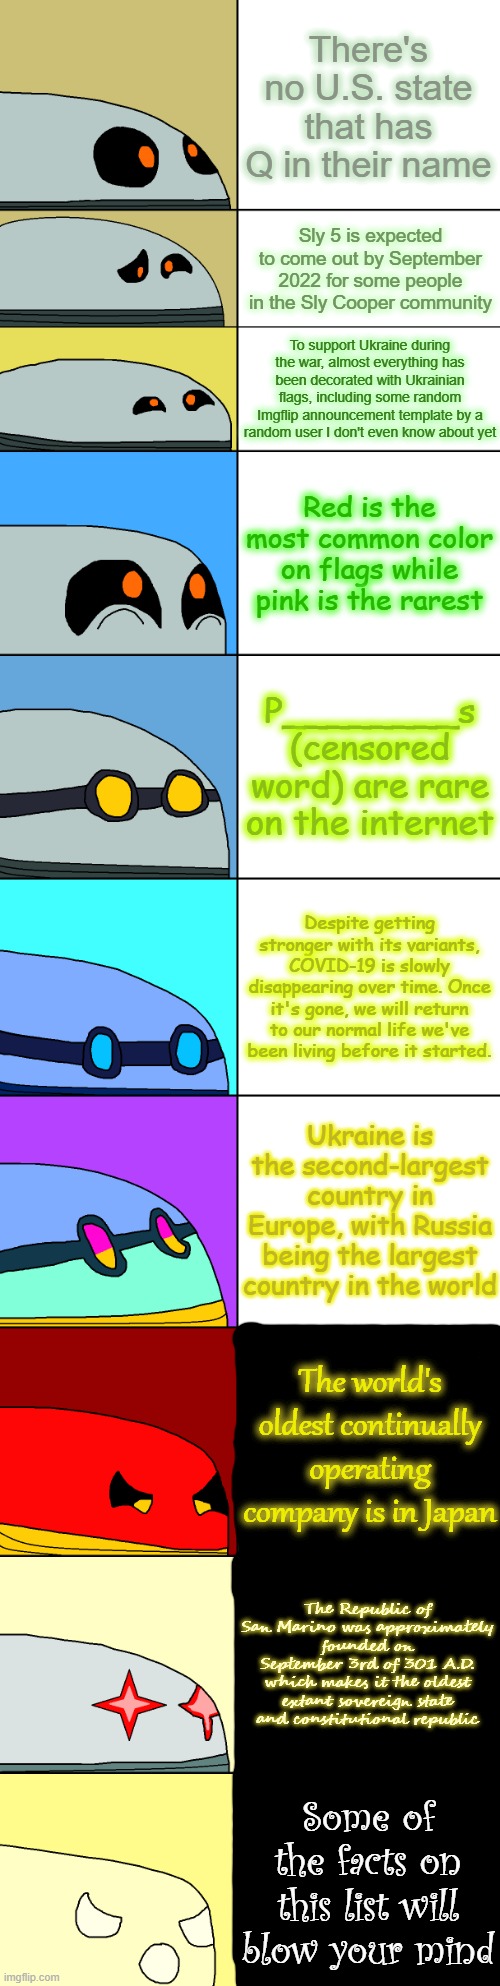 Interesting Facts #1 |  There's no U.S. state that has Q in their name; Sly 5 is expected to come out by September 2022 for some people in the Sly Cooper community; To support Ukraine during the war, almost everything has been decorated with Ukrainian flags, including some random Imgflip announcement template by a random user I don't even know about yet; Red is the most common color on flags while pink is the rarest; P________s (censored word) are rare on the internet; Despite getting stronger with its variants, COVID-19 is slowly disappearing over time. Once it's gone, we will return to our normal life we've been living before it started. Ukraine is the second-largest country in Europe, with Russia being the largest country in the world; The world's oldest continually operating company is in Japan; The Republic of San Marino was approximately founded on September 3rd of 301 A.D. which makes it the oldest extant sovereign state and constitutional republic; Some of the facts on this list will blow your mind | image tagged in wandering husk ascending,interesting facts,japan,ukraine,list,san marino | made w/ Imgflip meme maker